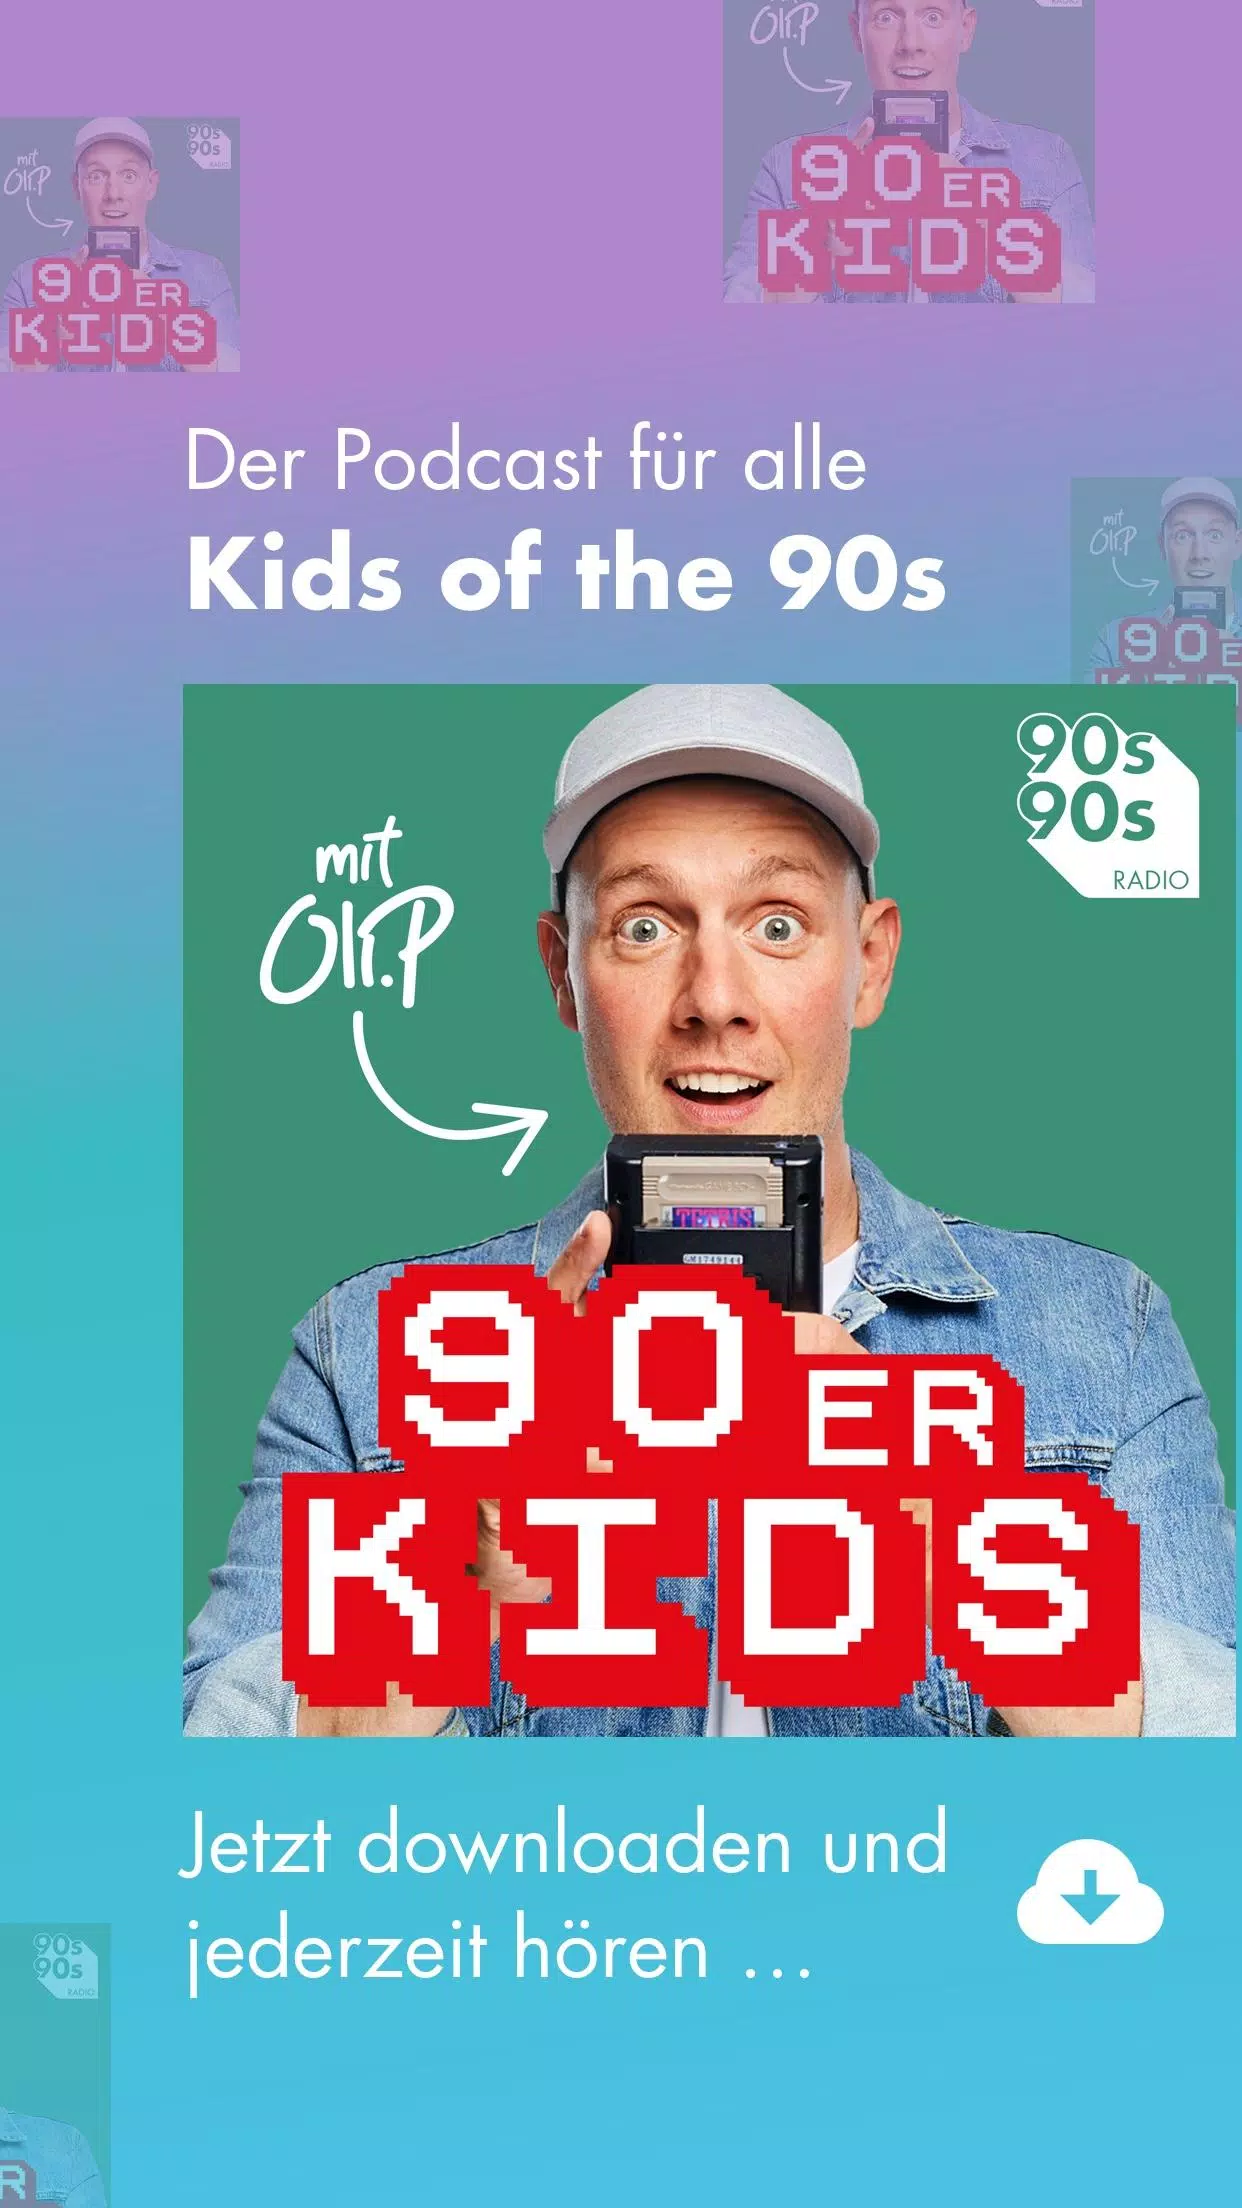 90s90s for Android - APK Download